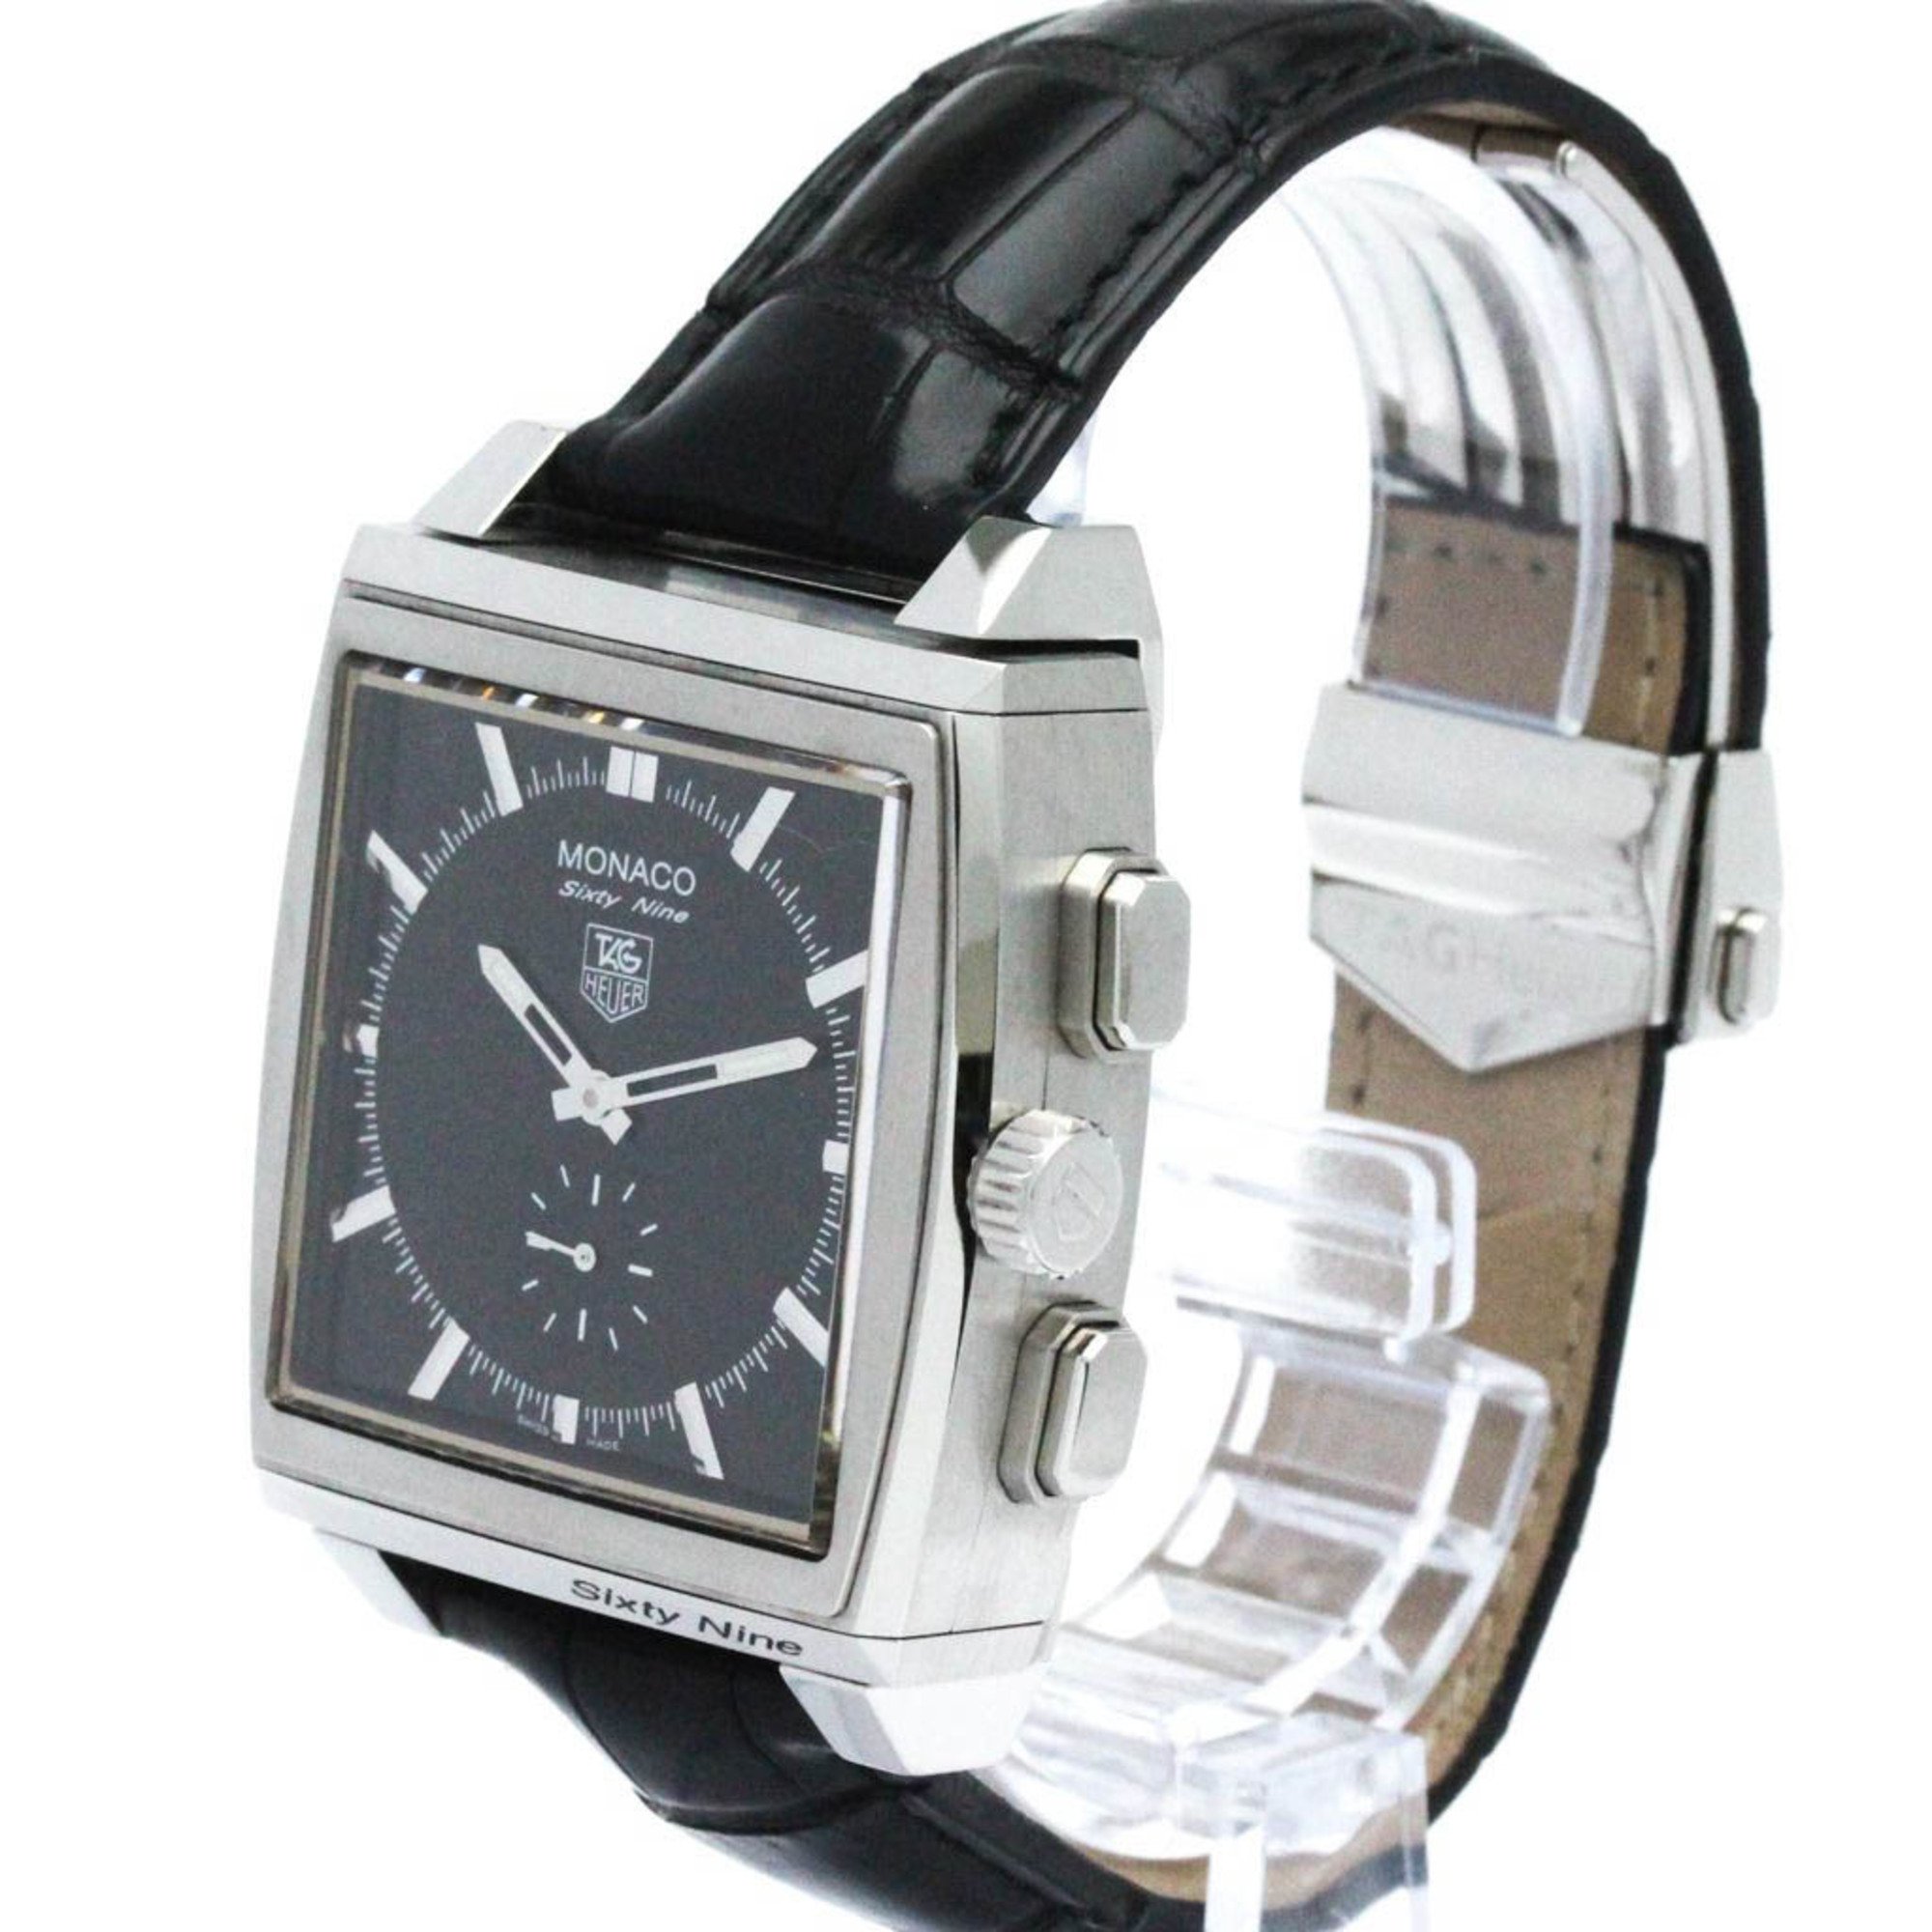 Polished TAG HEUER Monaco 69 Steel Automatic Leather Mens Watch CW9110 BF571654